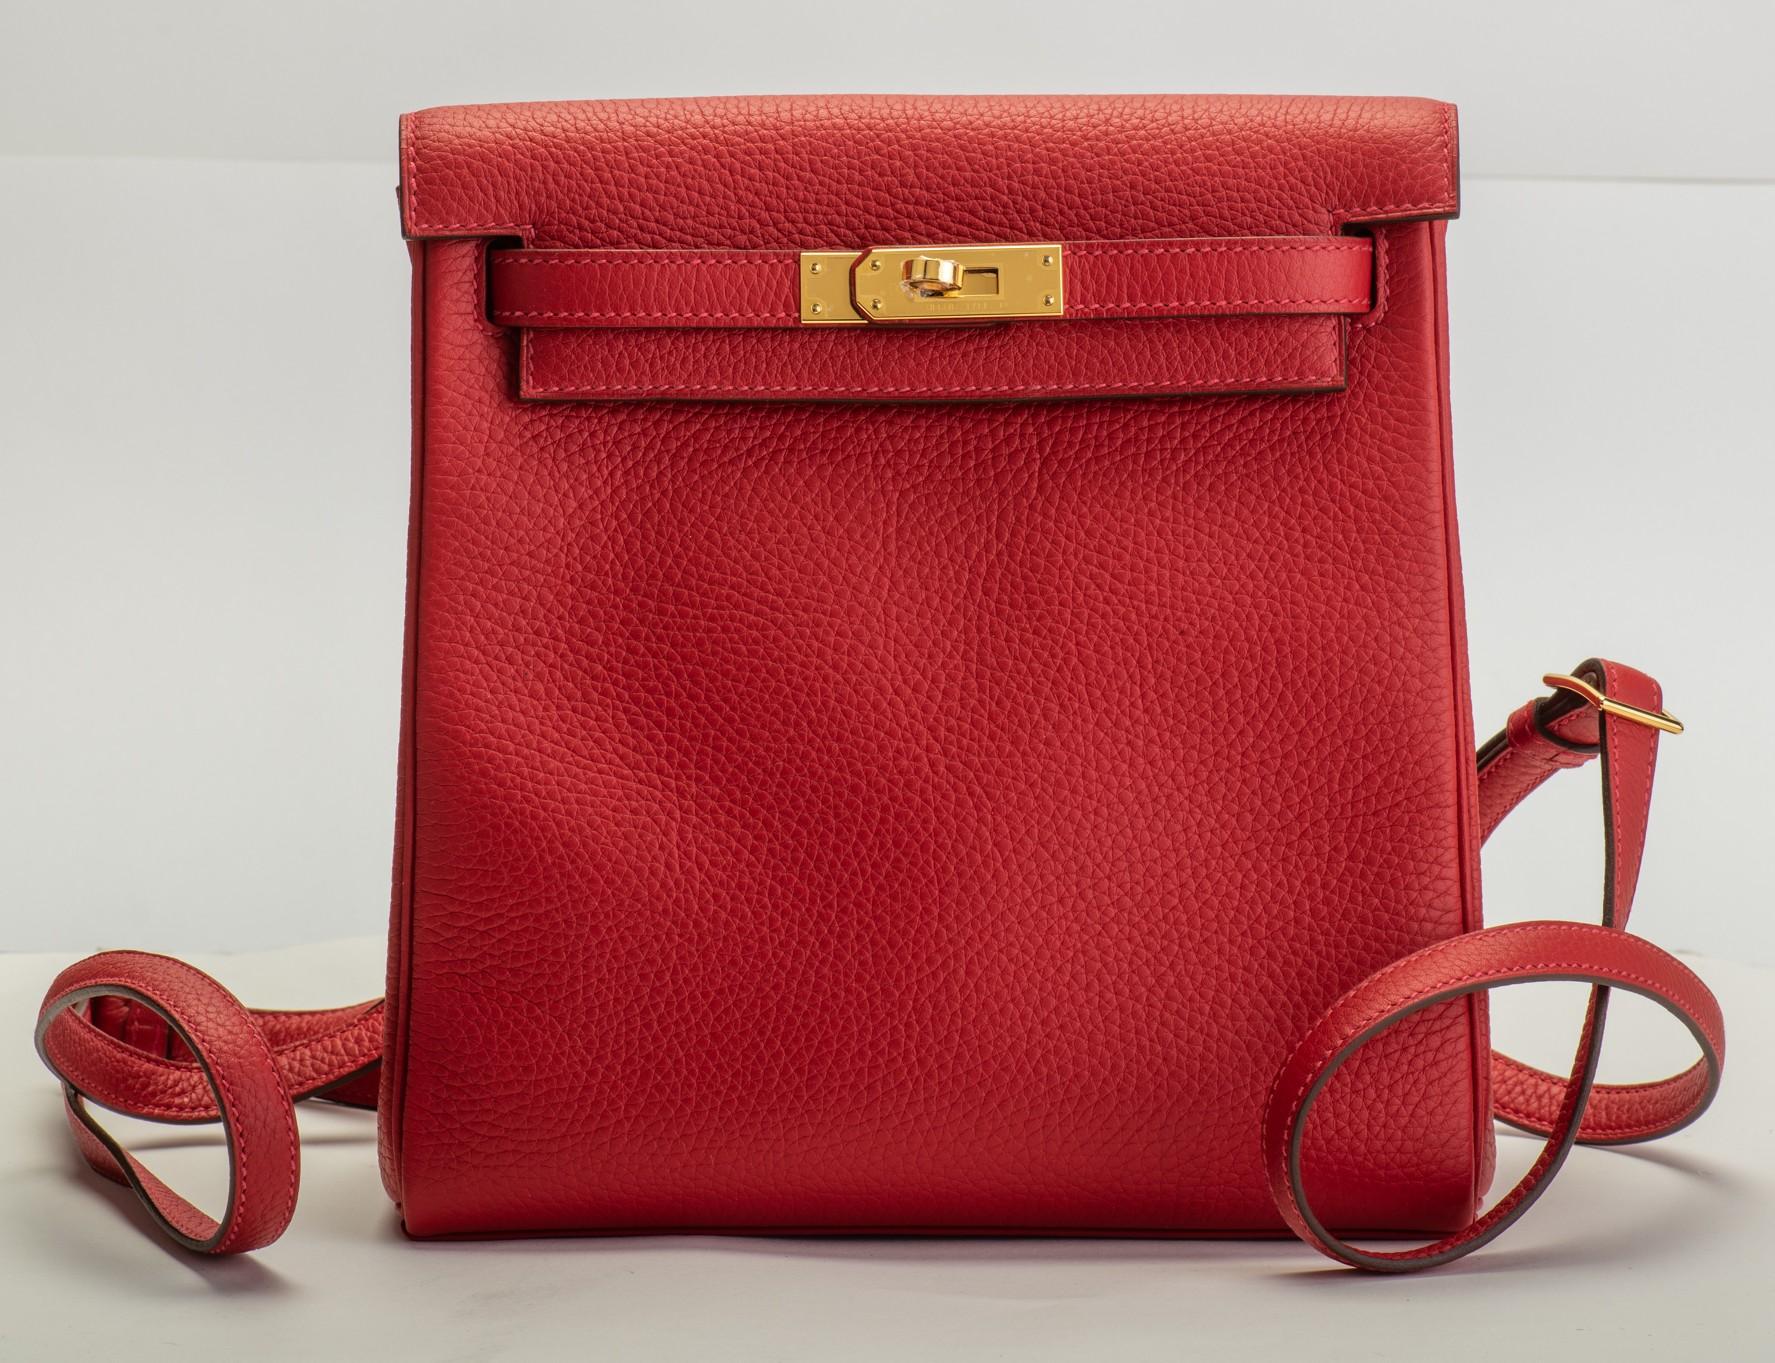 Hermès Kelly a Dos backpack in rouge casaque leather with goldtone hardware. Date stamp D for 2019. Brand new with full set: dust cover, booklet, box, ribbon, and shipping bag.